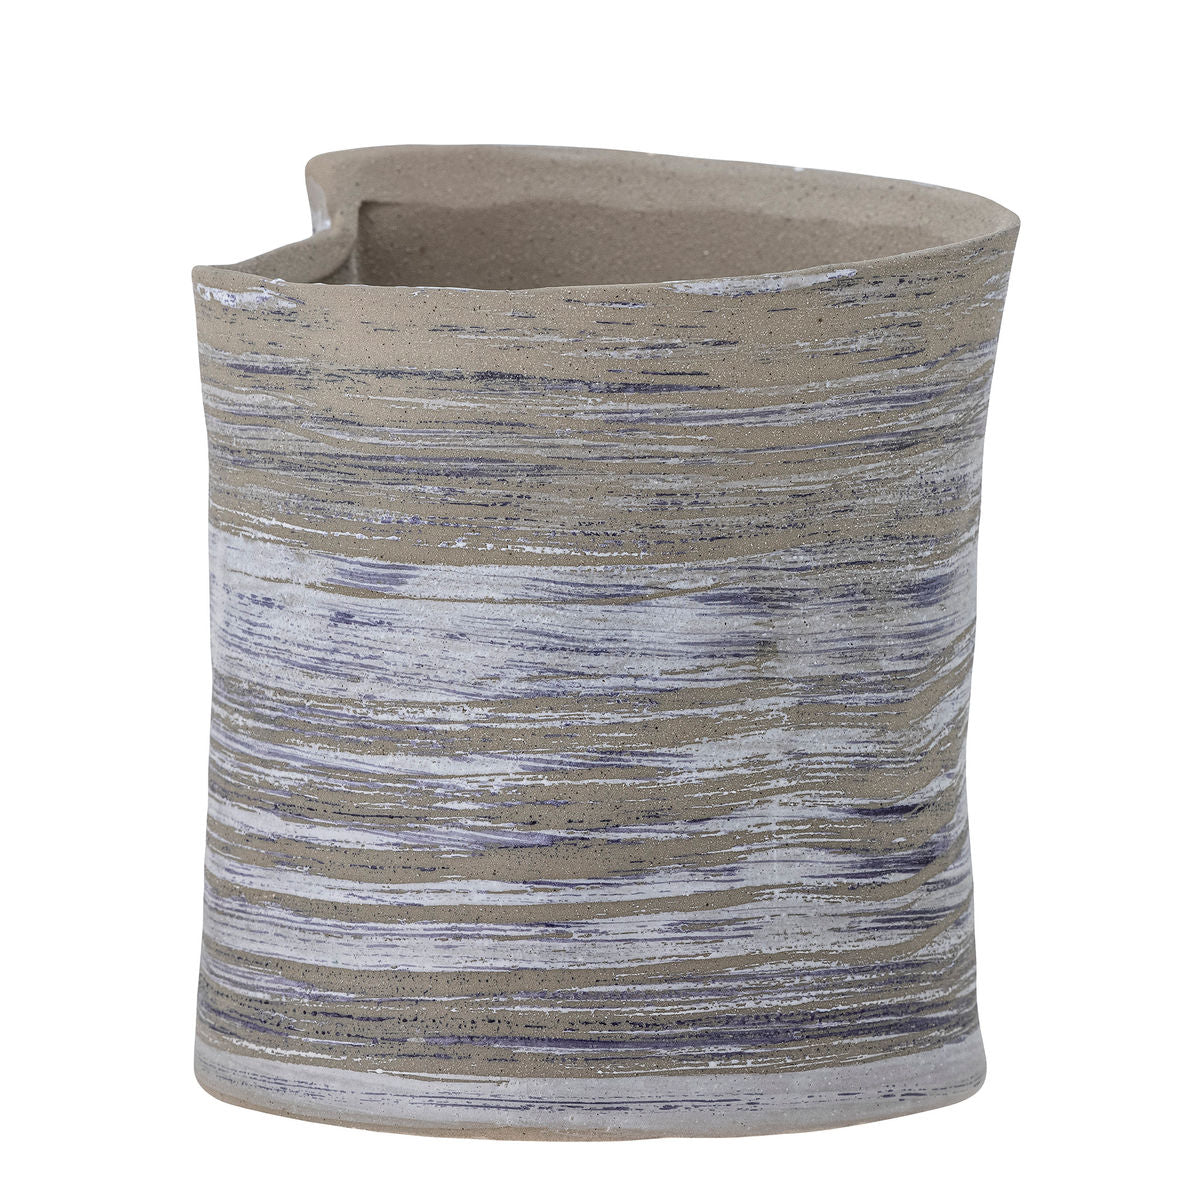 Bloomingville Adelle Herbal Potted Hides, Gray, Stoneware